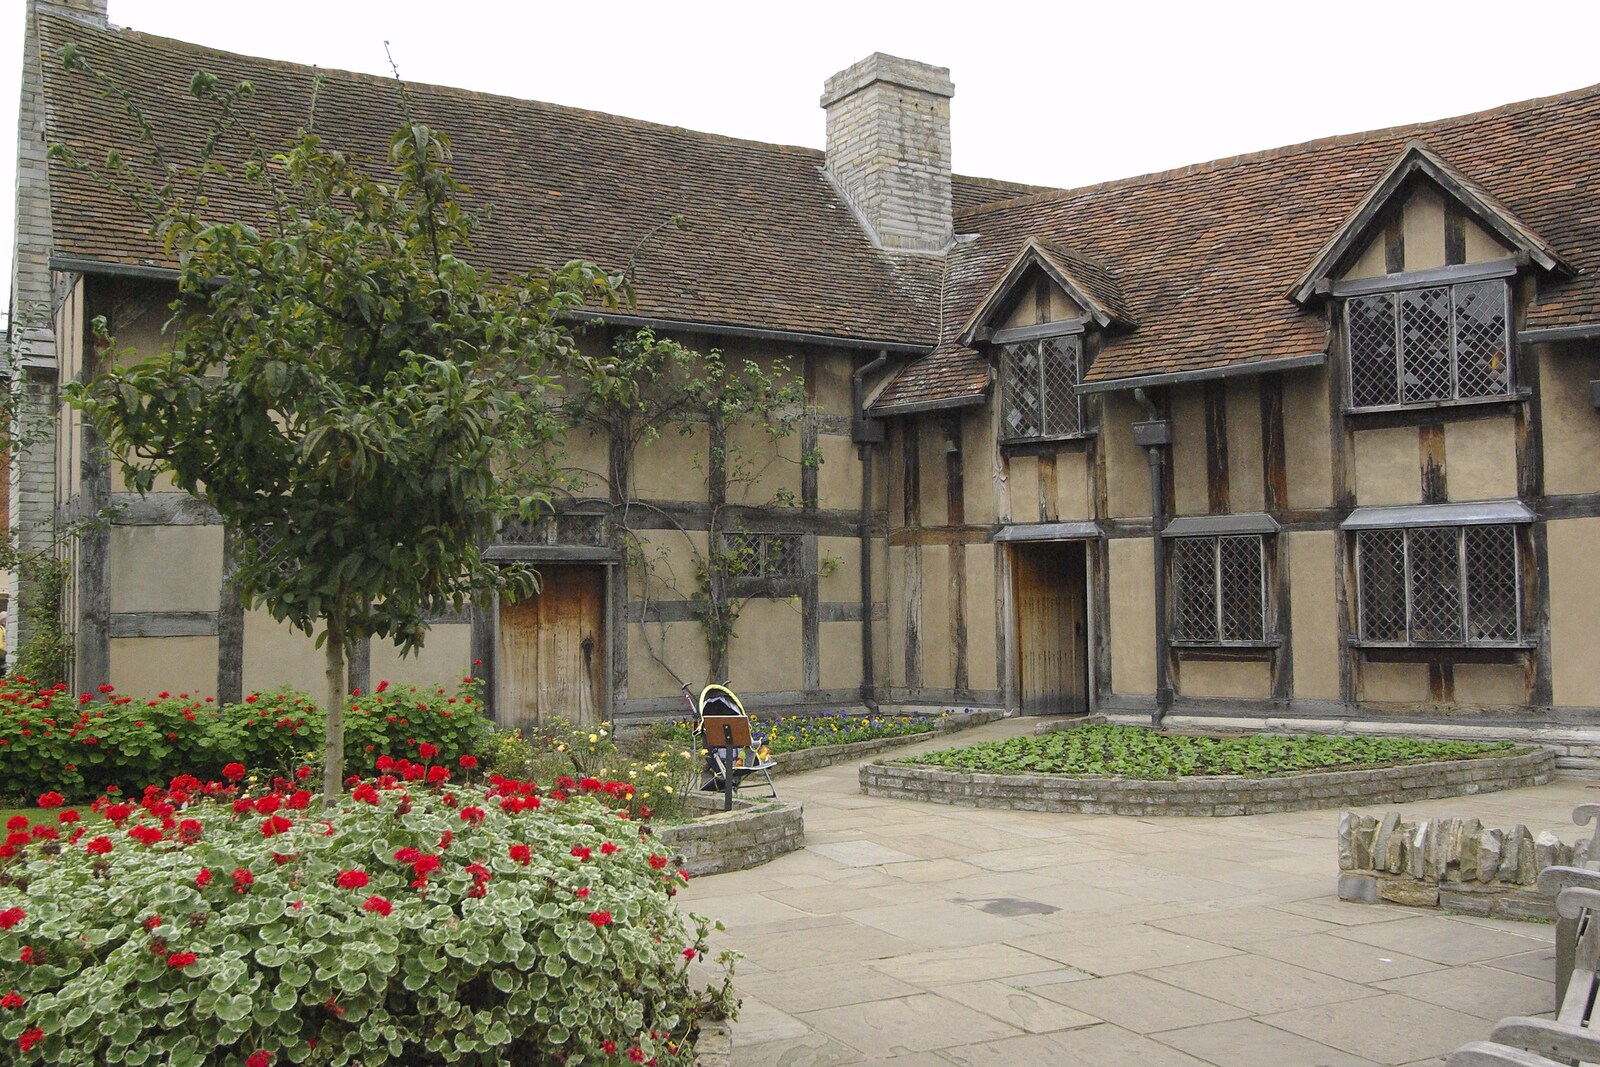 Bill's pad: Shakespeare's house from A BSCC Presentation, and Matt's Wedding Reception, Solihull - 6th October 2007